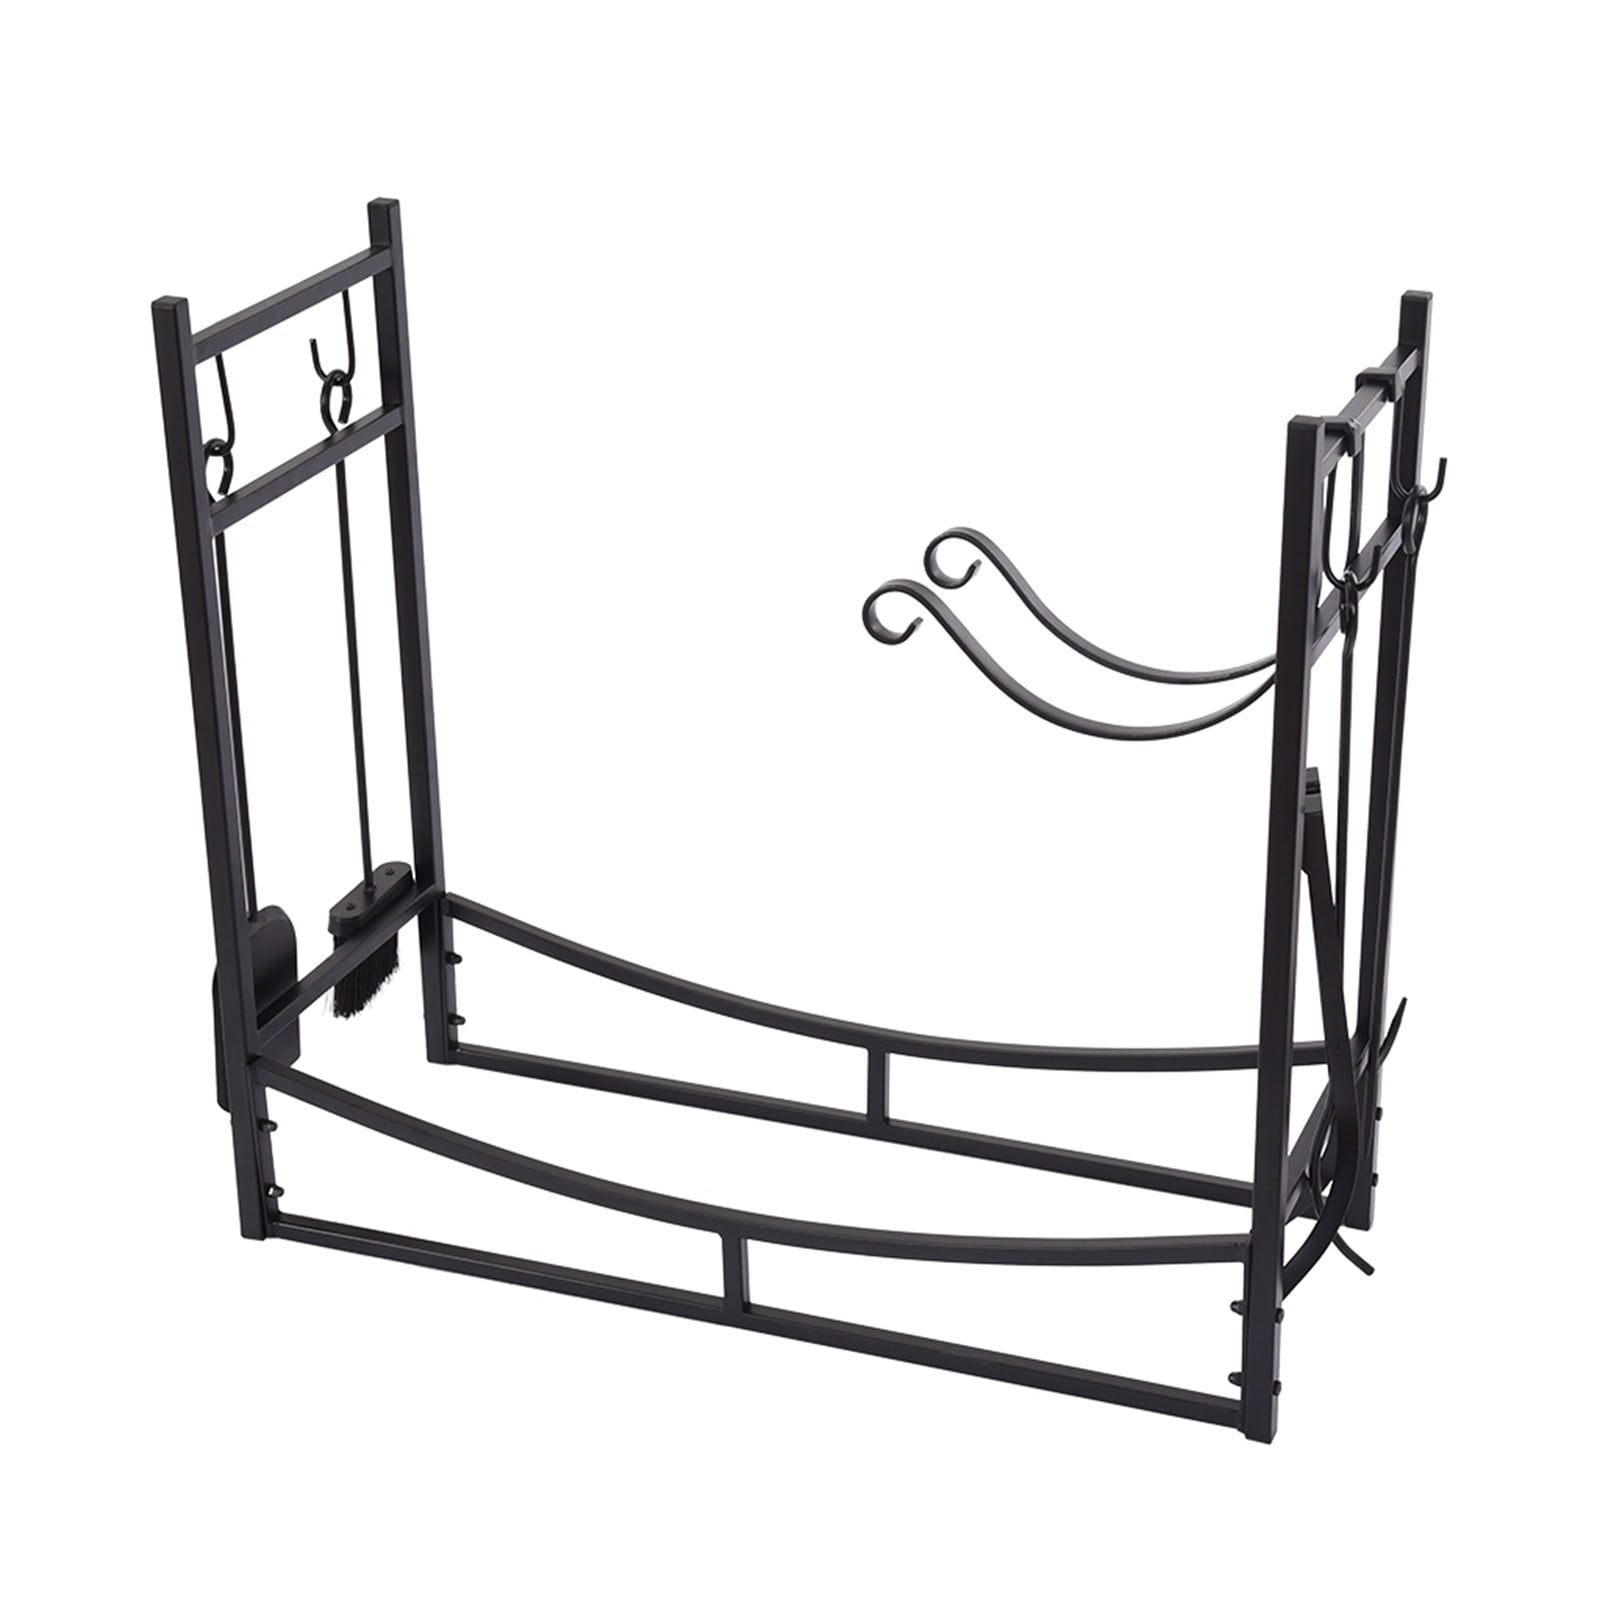 Details about   Metal Pipe Firewood Storage Rack Holder As Fireplace Decorations In/Outdoor US